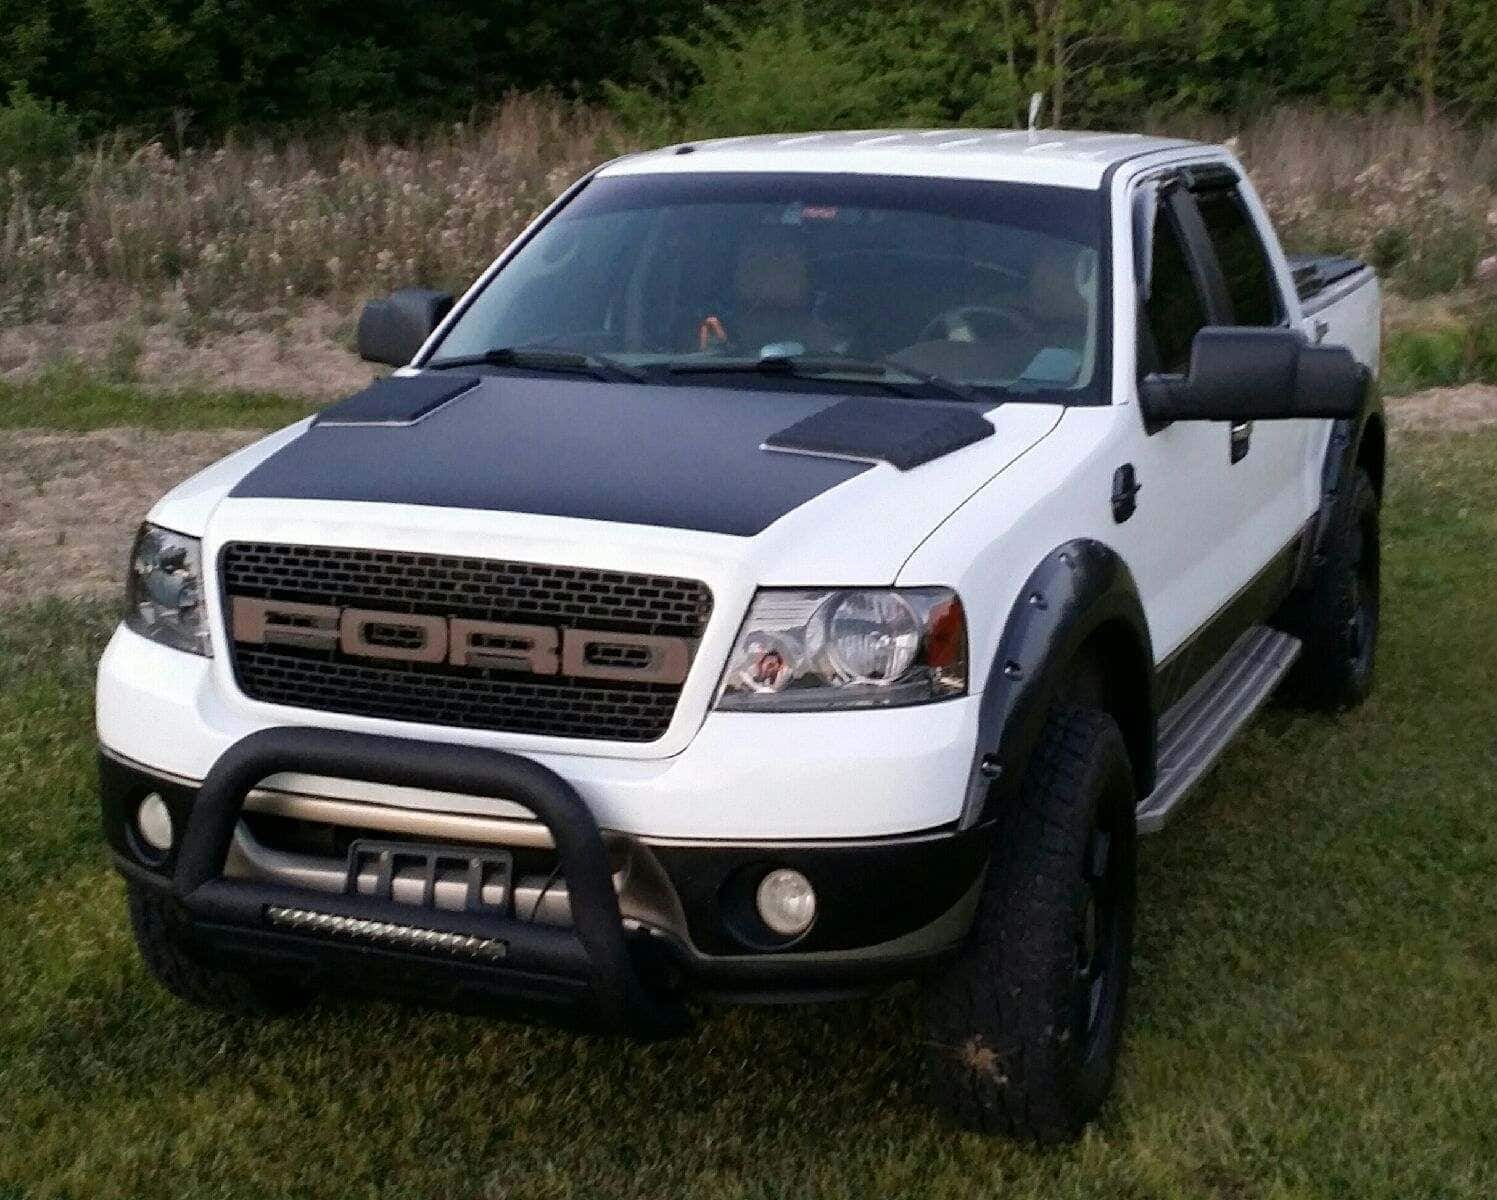 '04 - '08 Truck Picture Thread... - Page 2028 - Ford F150 Forum